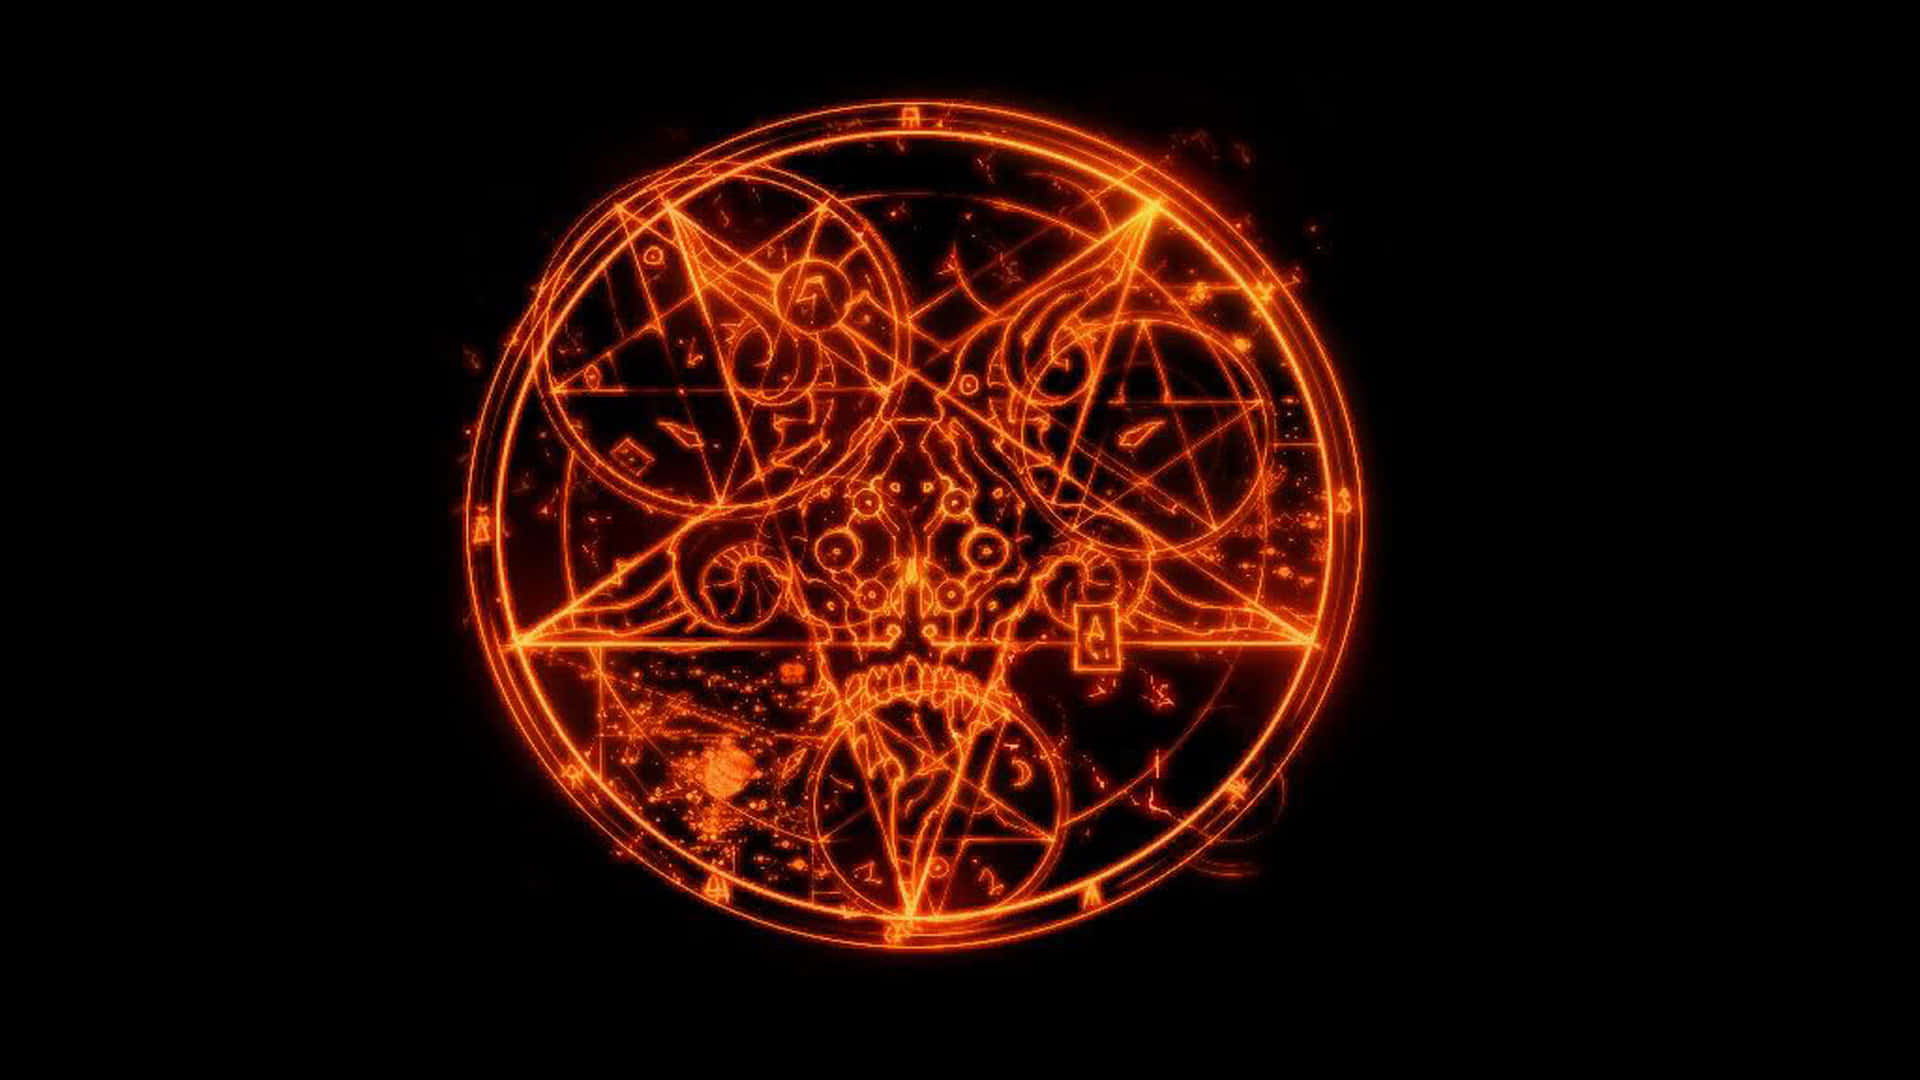 Enigmatic Occult Symbols on a Mysterious Dark Background Wallpaper